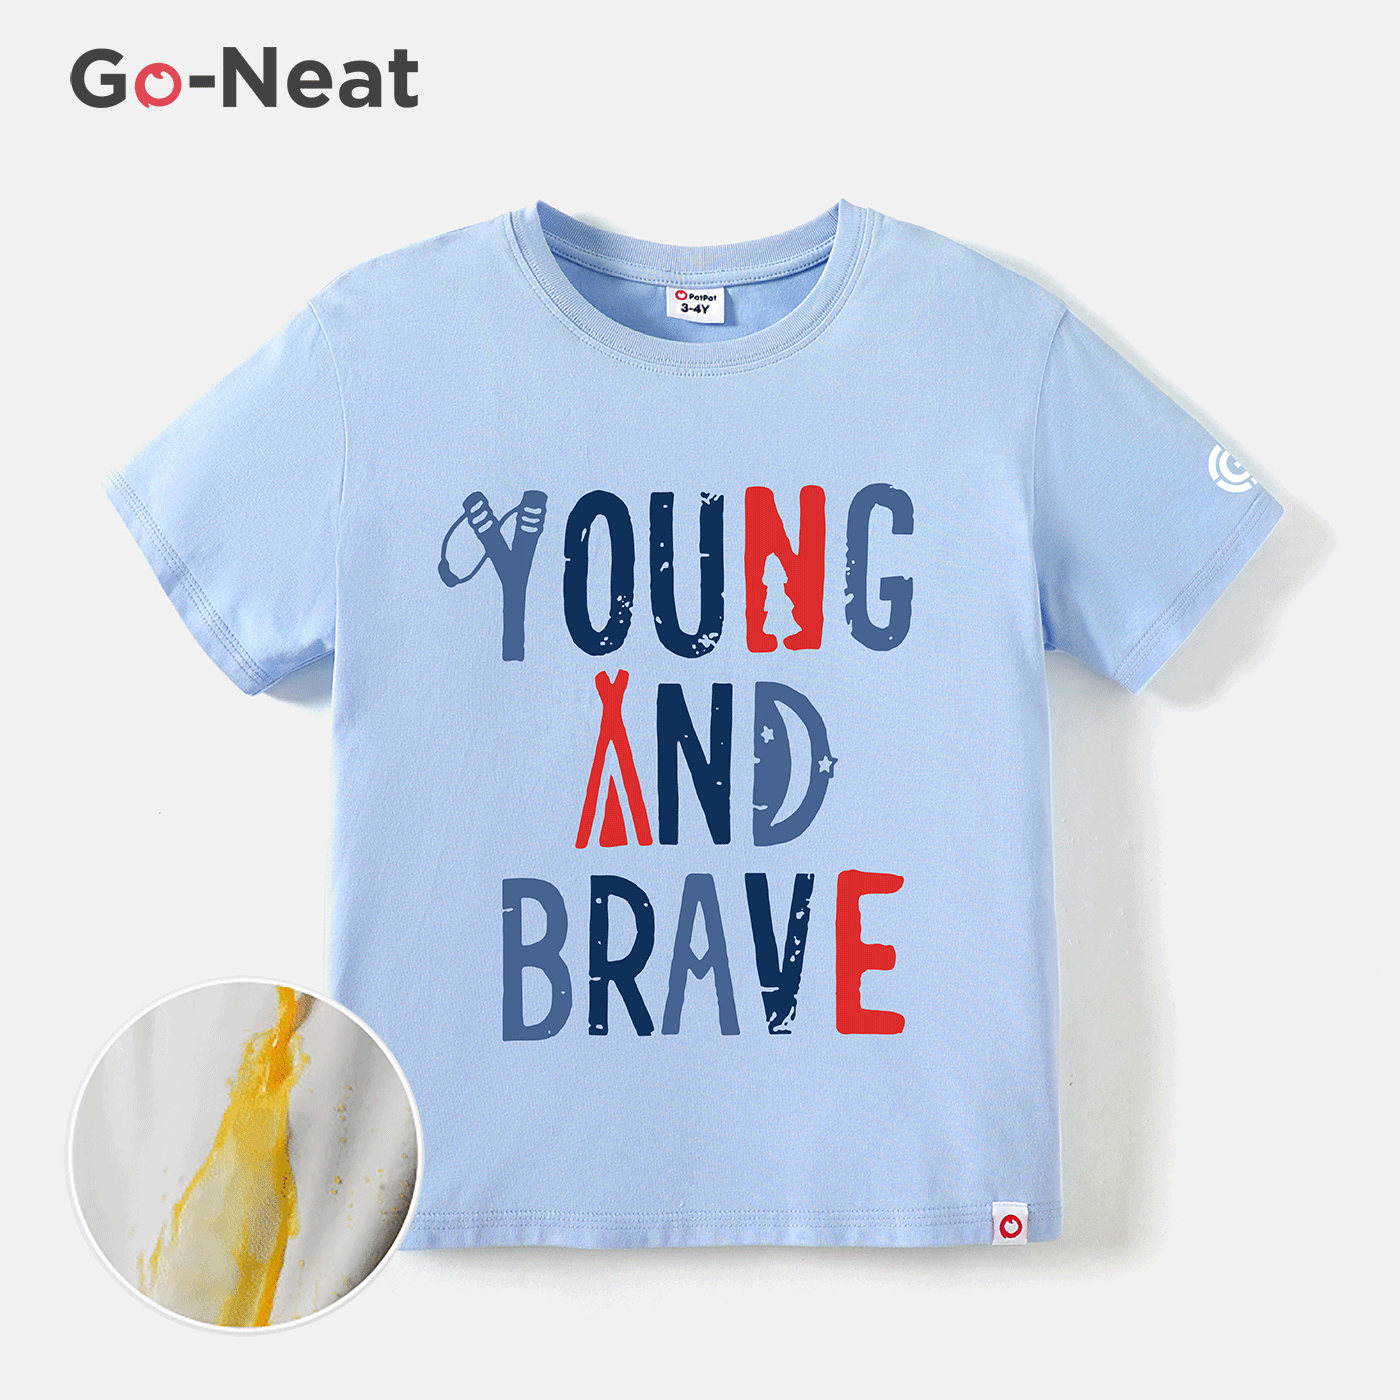 Go-Neat Water Repellent and Stain Resistant Sibling Matching Letter Print Short-sleeve Tee